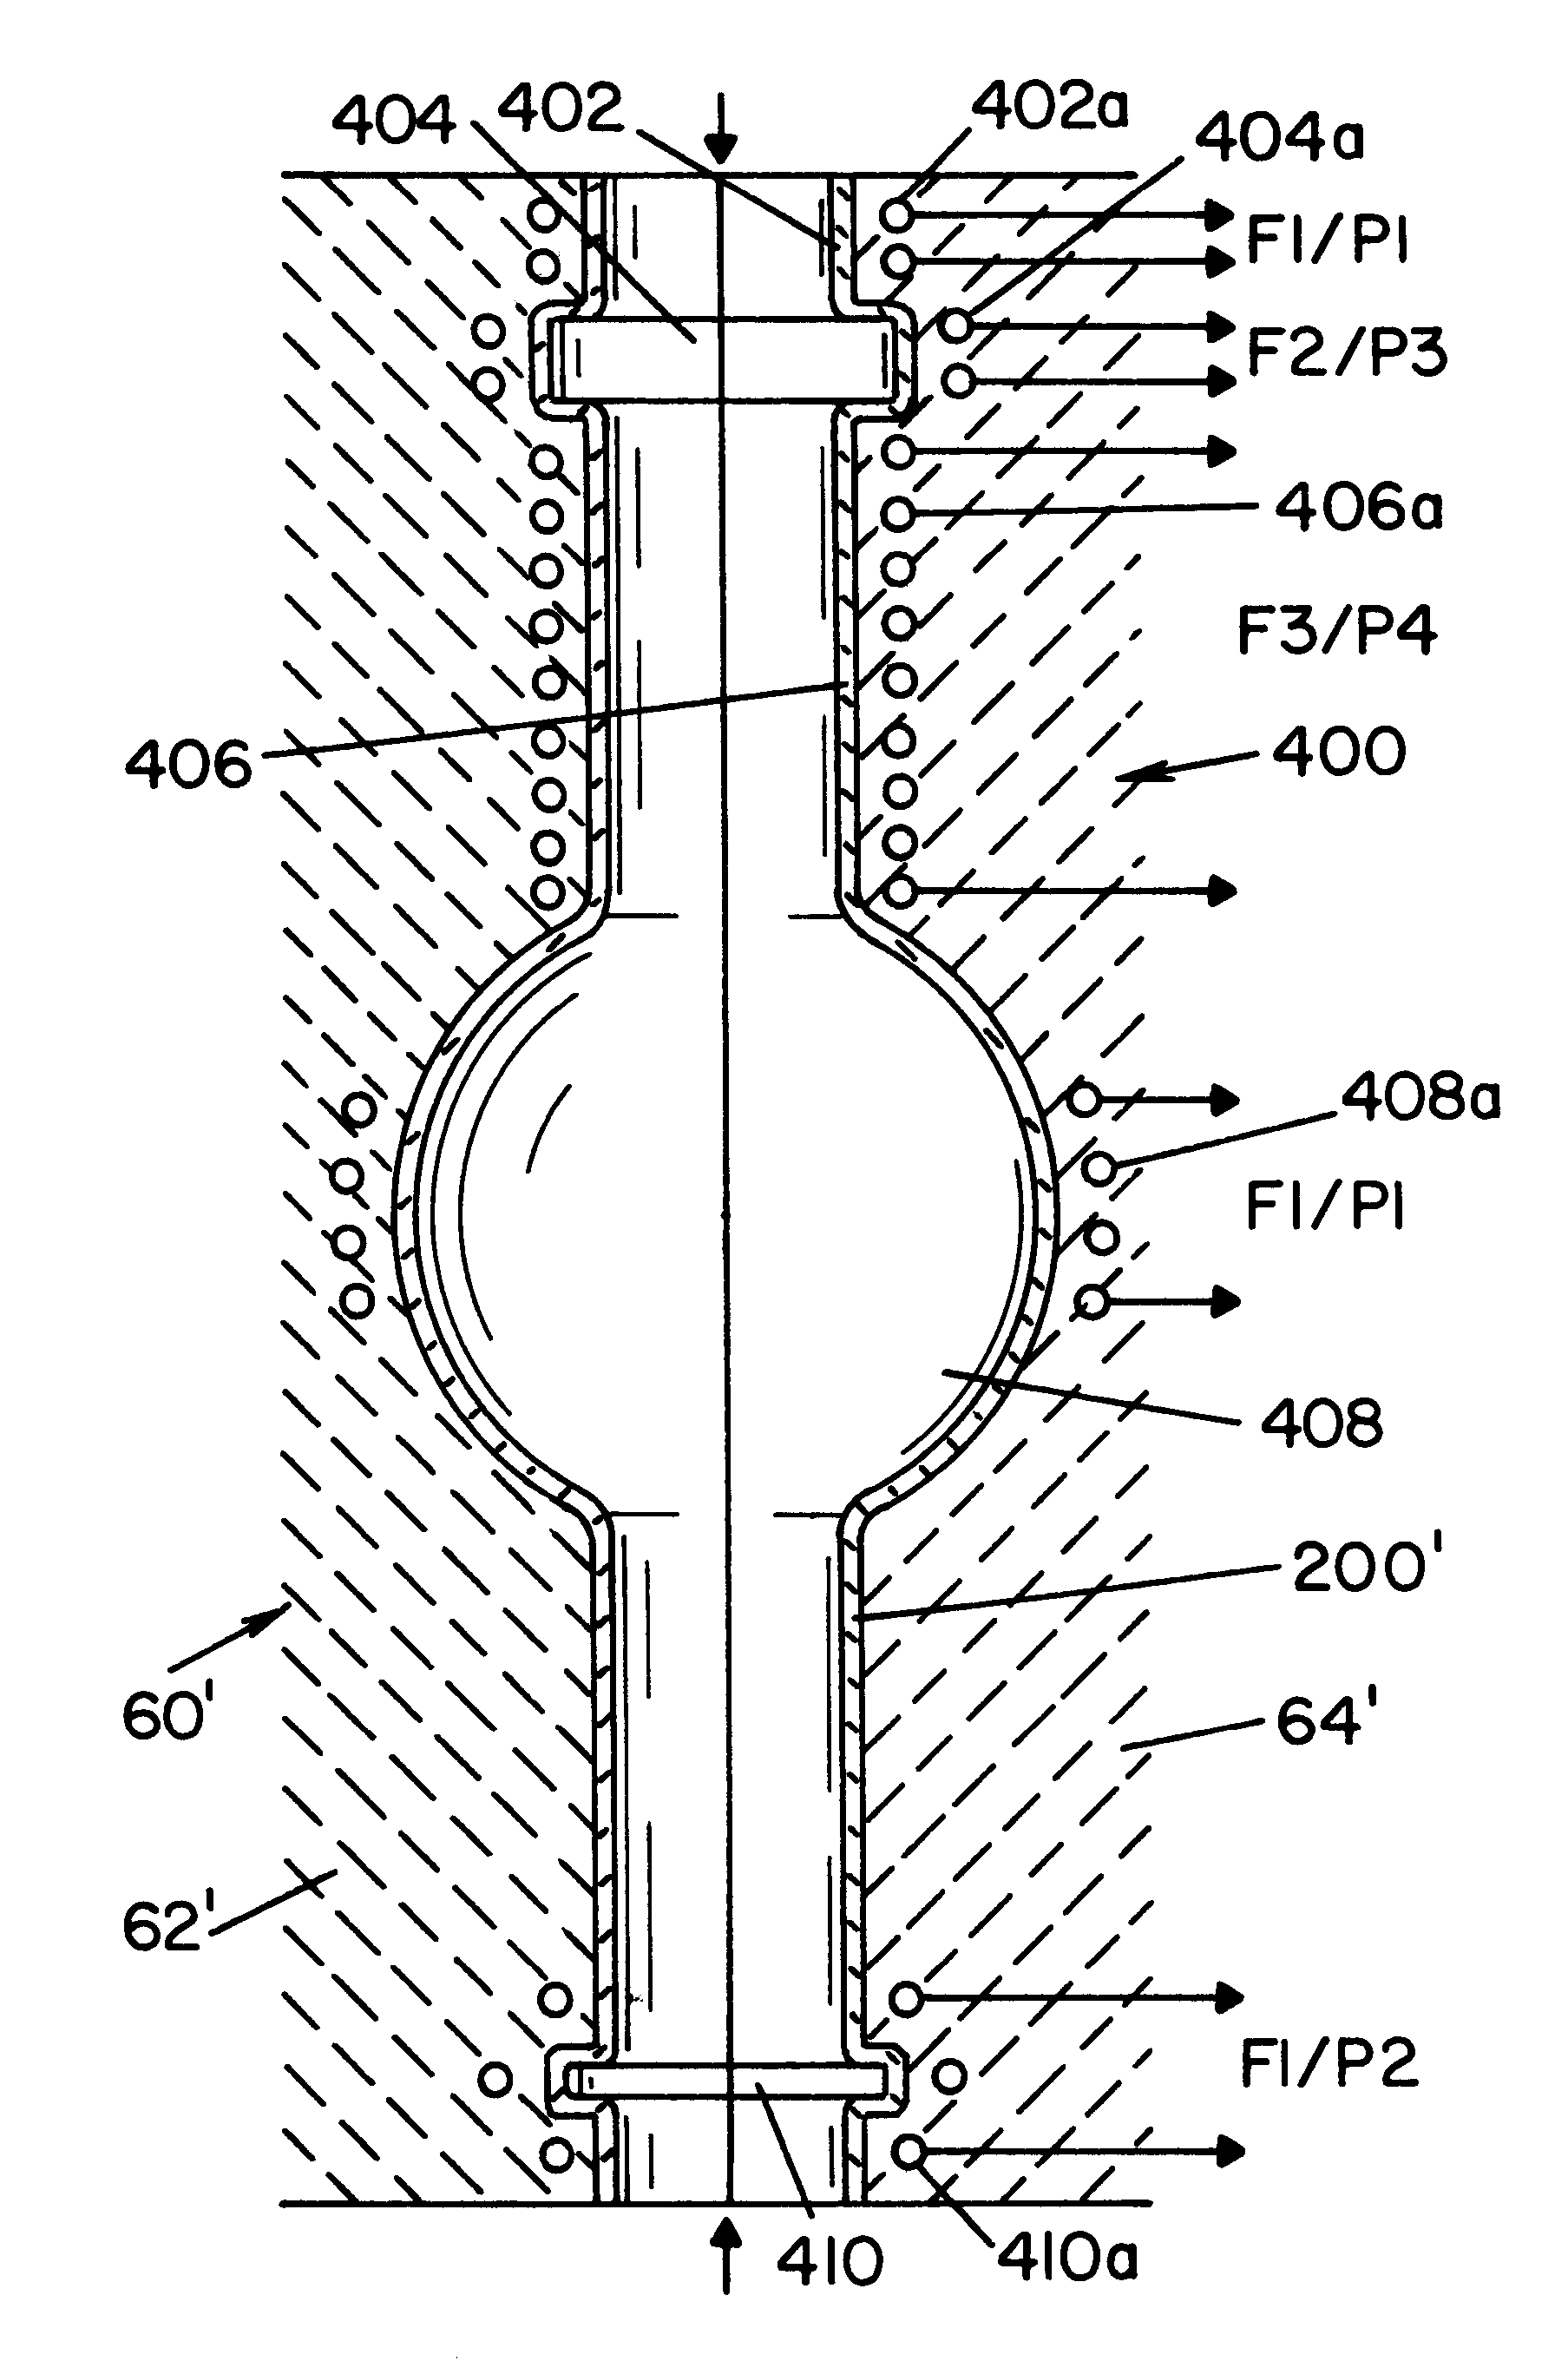 Method of forming a tubular blank into a structural component and die therefor